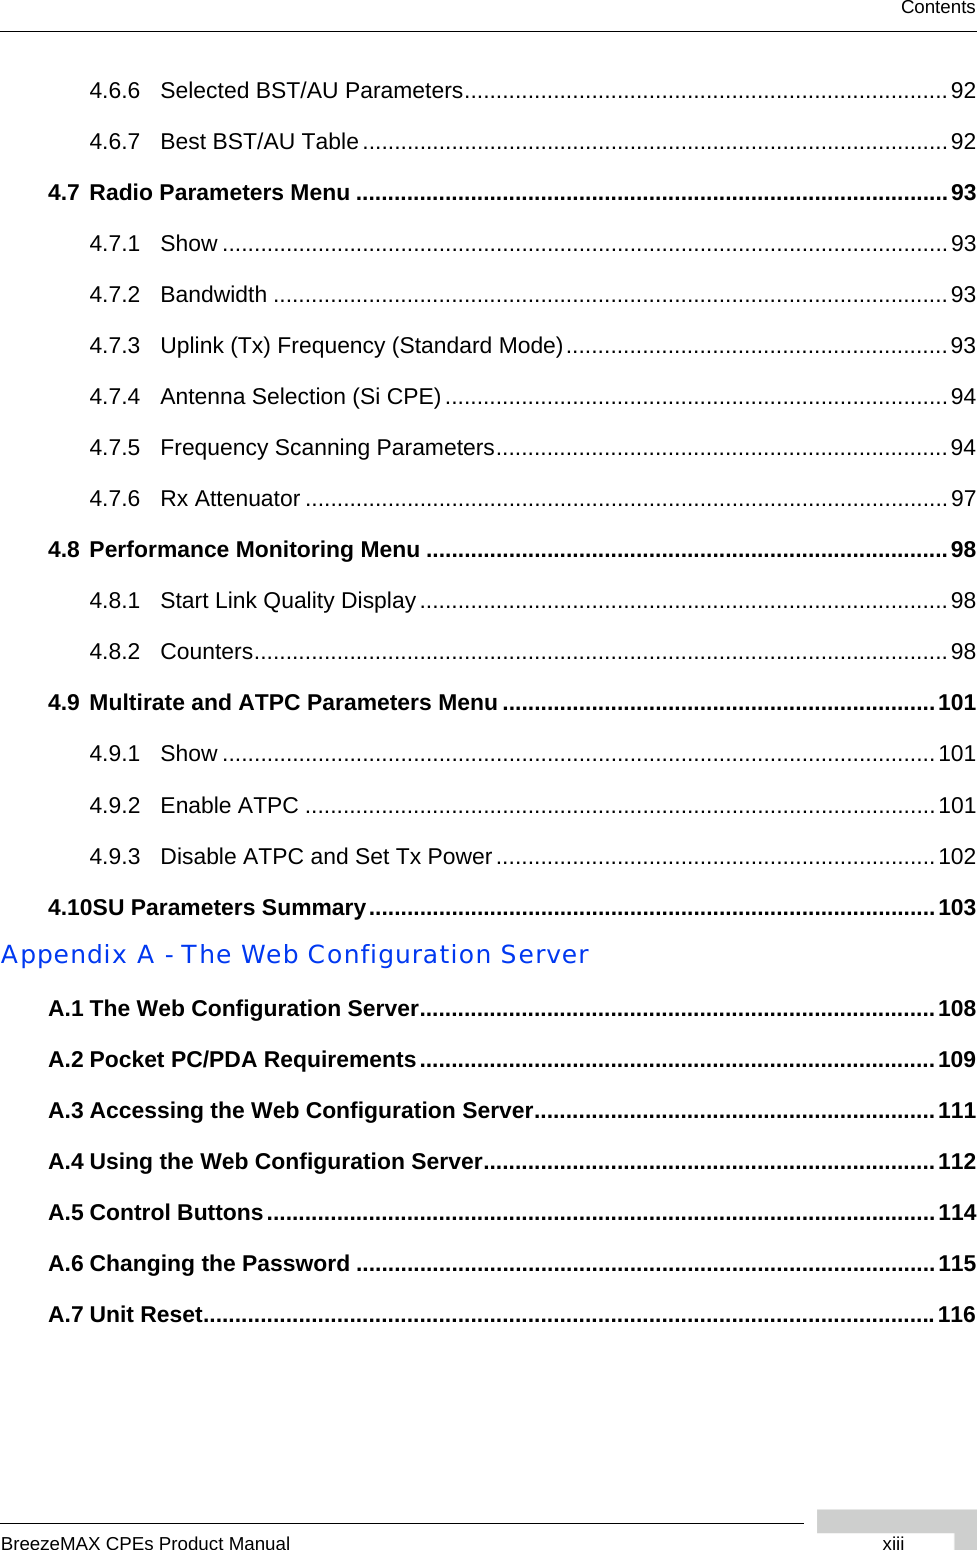 BreezeMAX CPEs Product Manual xiiiContents4.6.6 Selected BST/AU Parameters............................................................................924.6.7 Best BST/AU Table............................................................................................924.7 Radio Parameters Menu .............................................................................................934.7.1 Show ..................................................................................................................934.7.2 Bandwidth ..........................................................................................................934.7.3 Uplink (Tx) Frequency (Standard Mode)............................................................934.7.4 Antenna Selection (Si CPE)...............................................................................944.7.5 Frequency Scanning Parameters.......................................................................944.7.6 Rx Attenuator .....................................................................................................974.8 Performance Monitoring Menu ..................................................................................984.8.1 Start Link Quality Display...................................................................................984.8.2 Counters.............................................................................................................984.9 Multirate and ATPC Parameters Menu ....................................................................1014.9.1 Show ................................................................................................................1014.9.2 Enable ATPC ...................................................................................................1014.9.3 Disable ATPC and Set Tx Power.....................................................................1024.10SU Parameters Summary.........................................................................................103Appendix A - The Web Configuration ServerA.1 The Web Configuration Server.................................................................................108A.2 Pocket PC/PDA Requirements.................................................................................109A.3 Accessing the Web Configuration Server...............................................................111A.4 Using the Web Configuration Server.......................................................................112A.5 Control Buttons.........................................................................................................114A.6 Changing the Password ...........................................................................................115A.7 Unit Reset...................................................................................................................116